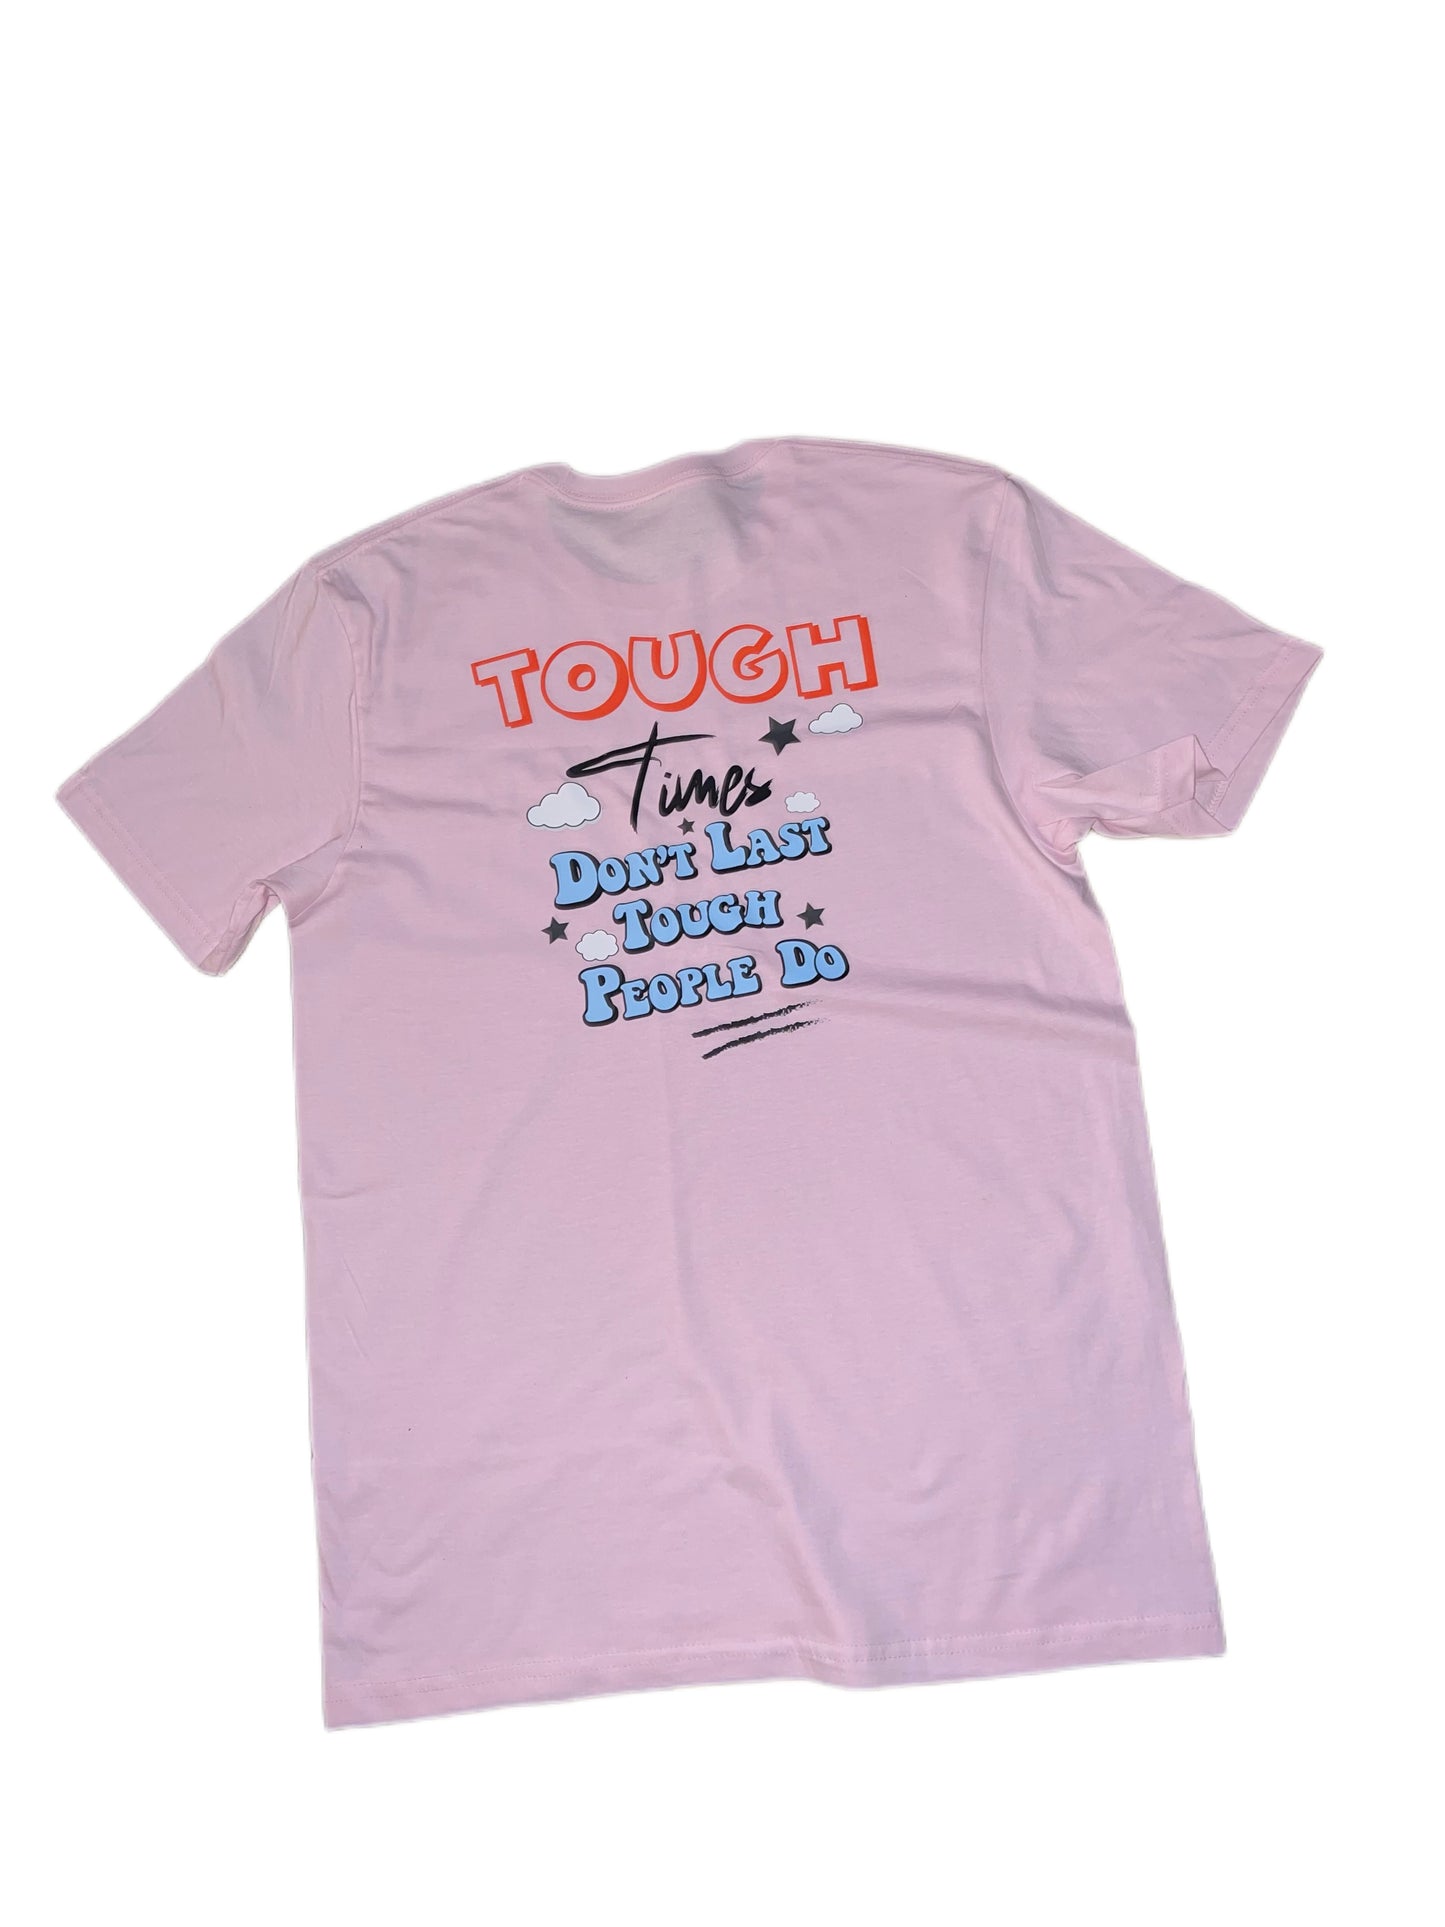 Tough Times Don’t Last (Breast Cancer) Limited